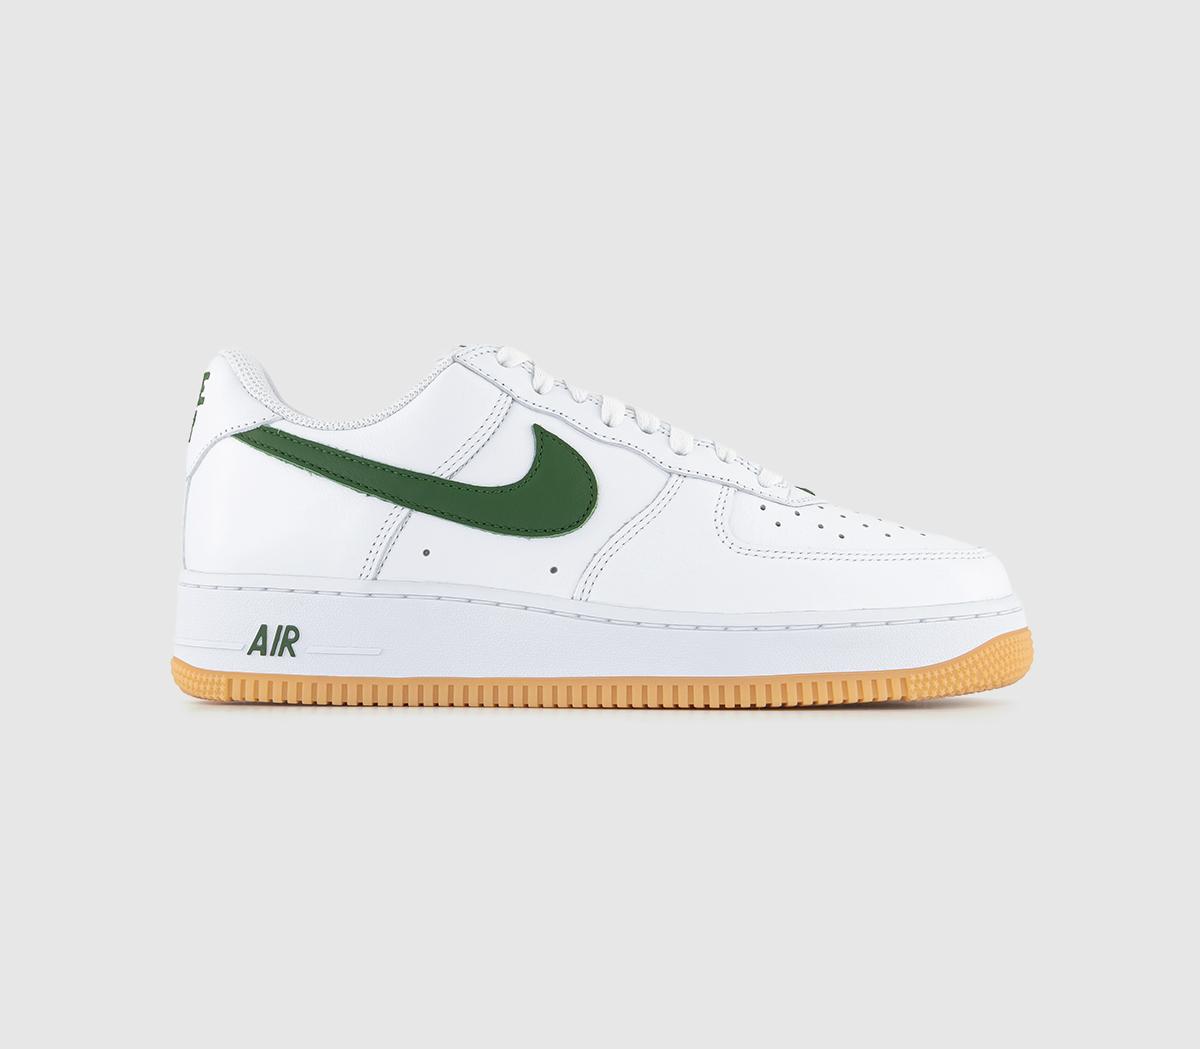 Nike Womens Air Force 1 Trainers White Forest Green Gum Yellow, 6 EU40